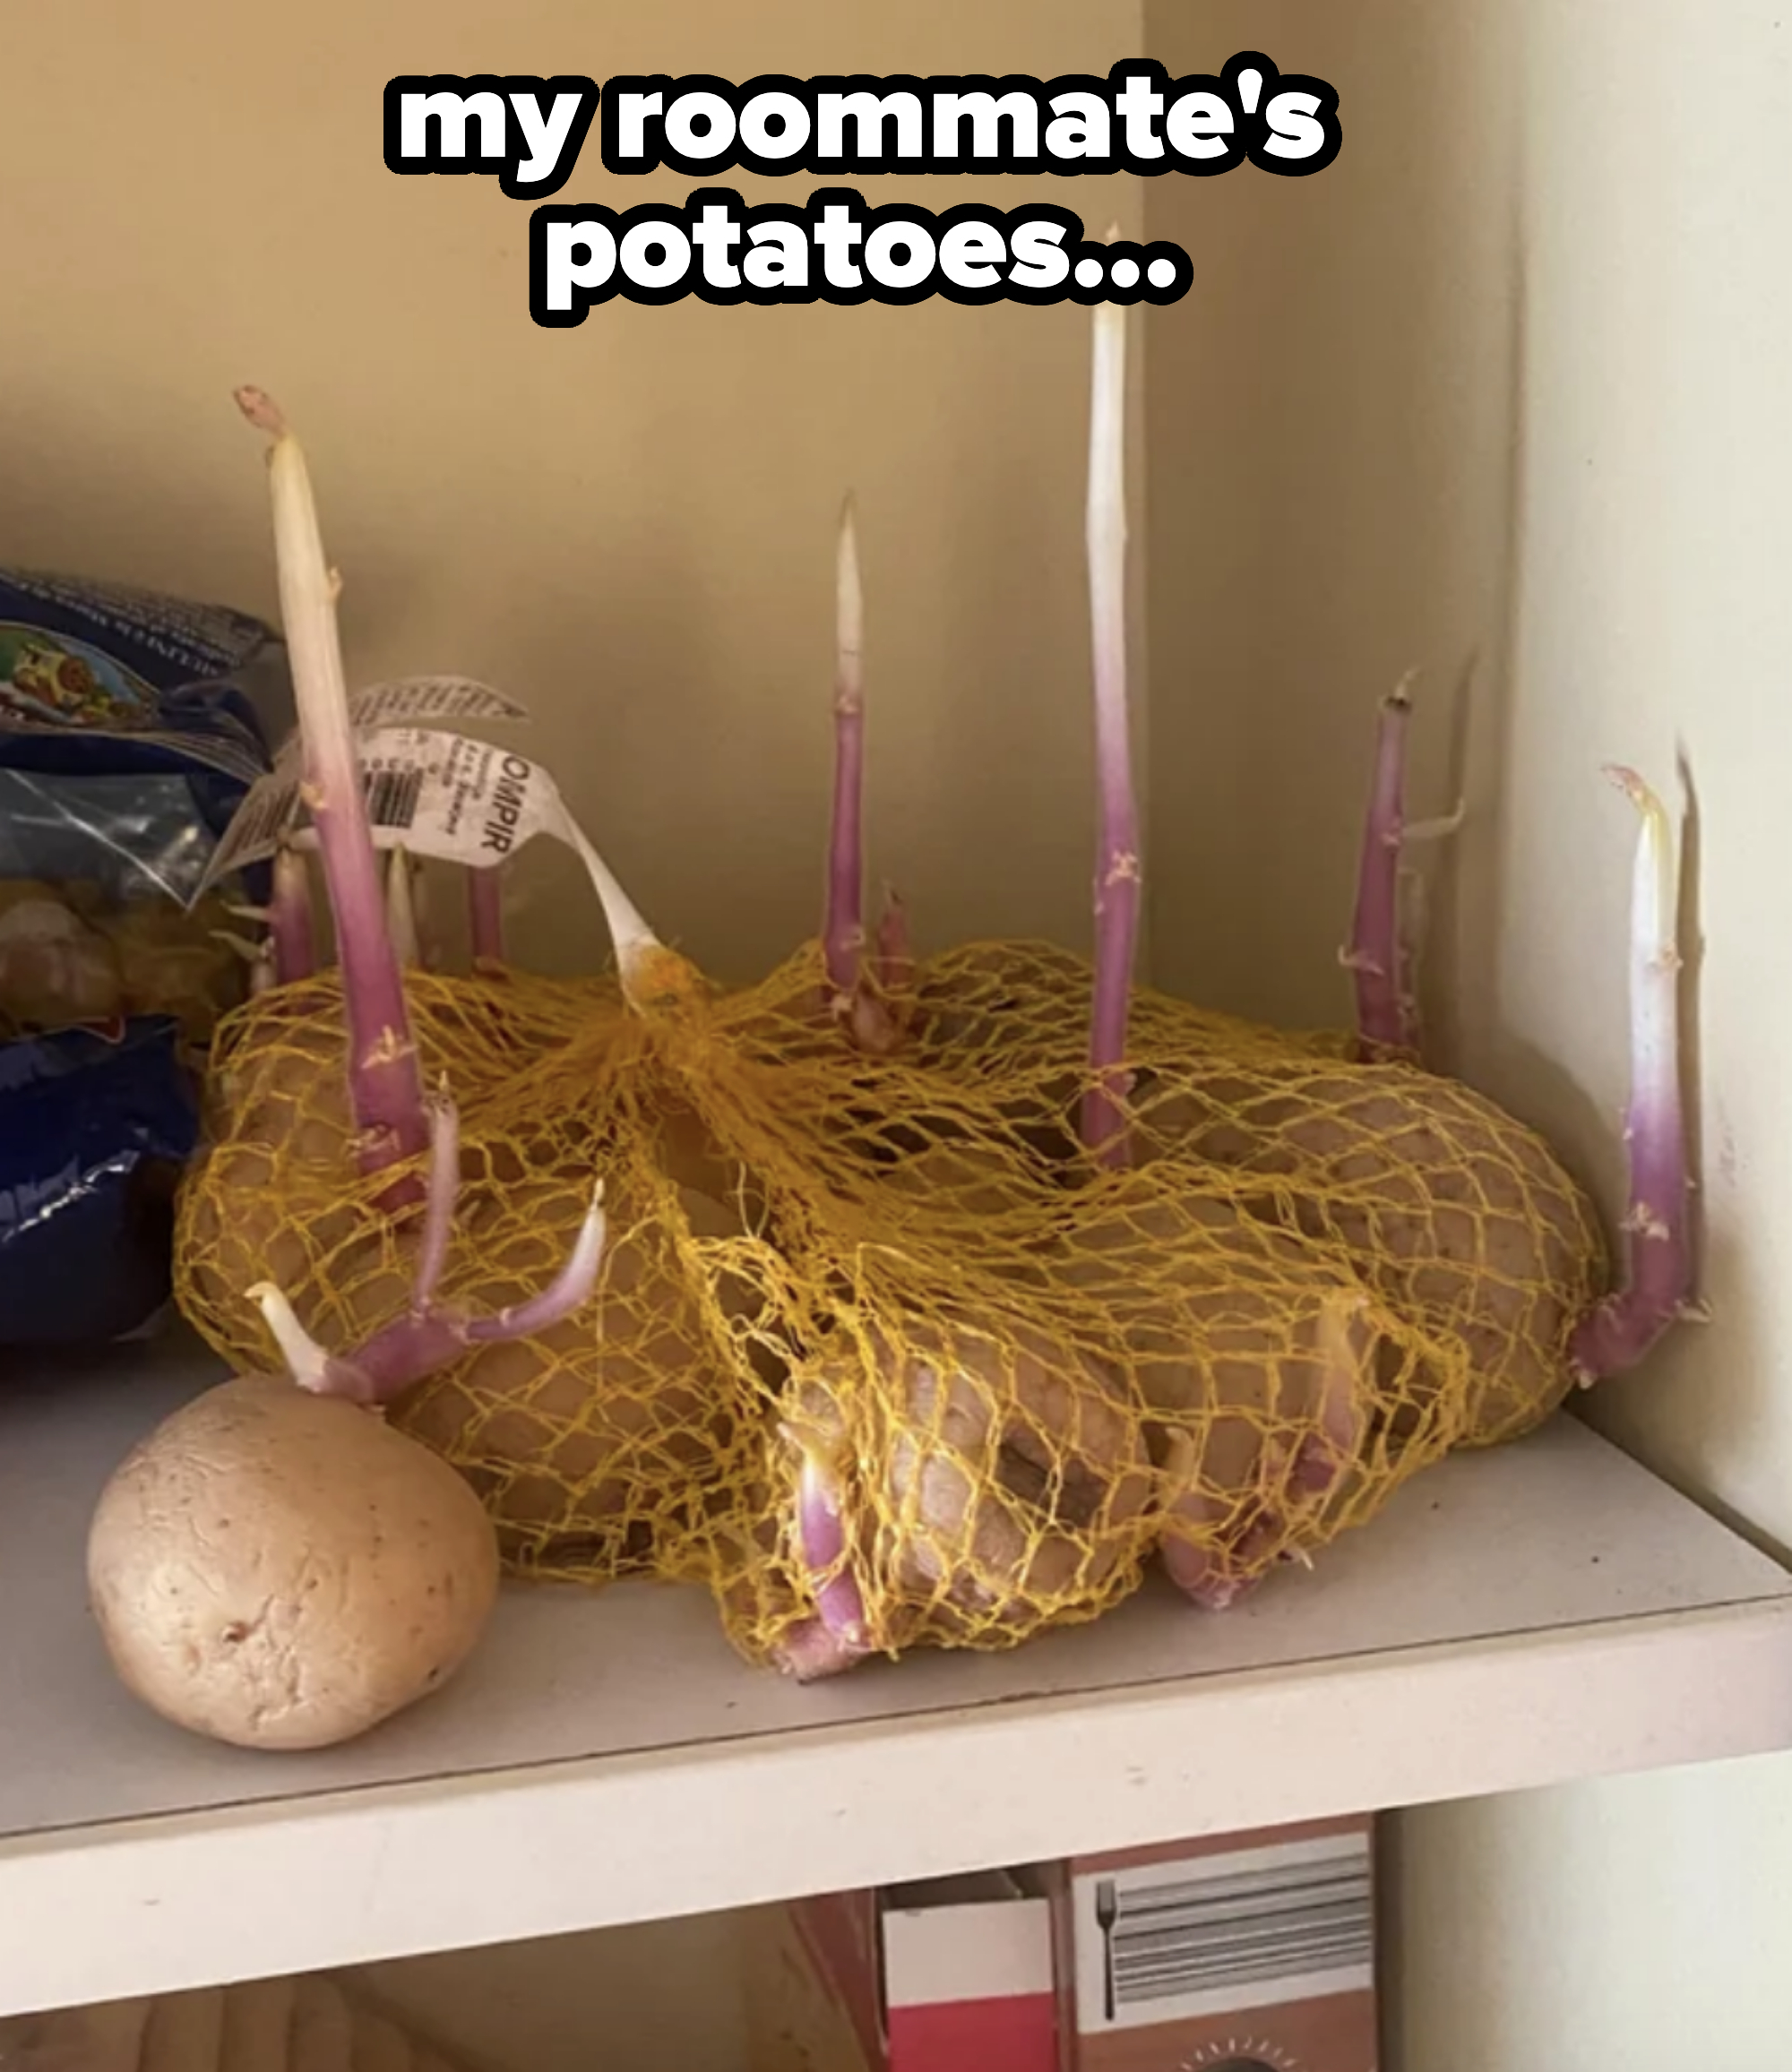 potatoes with very long roots grown